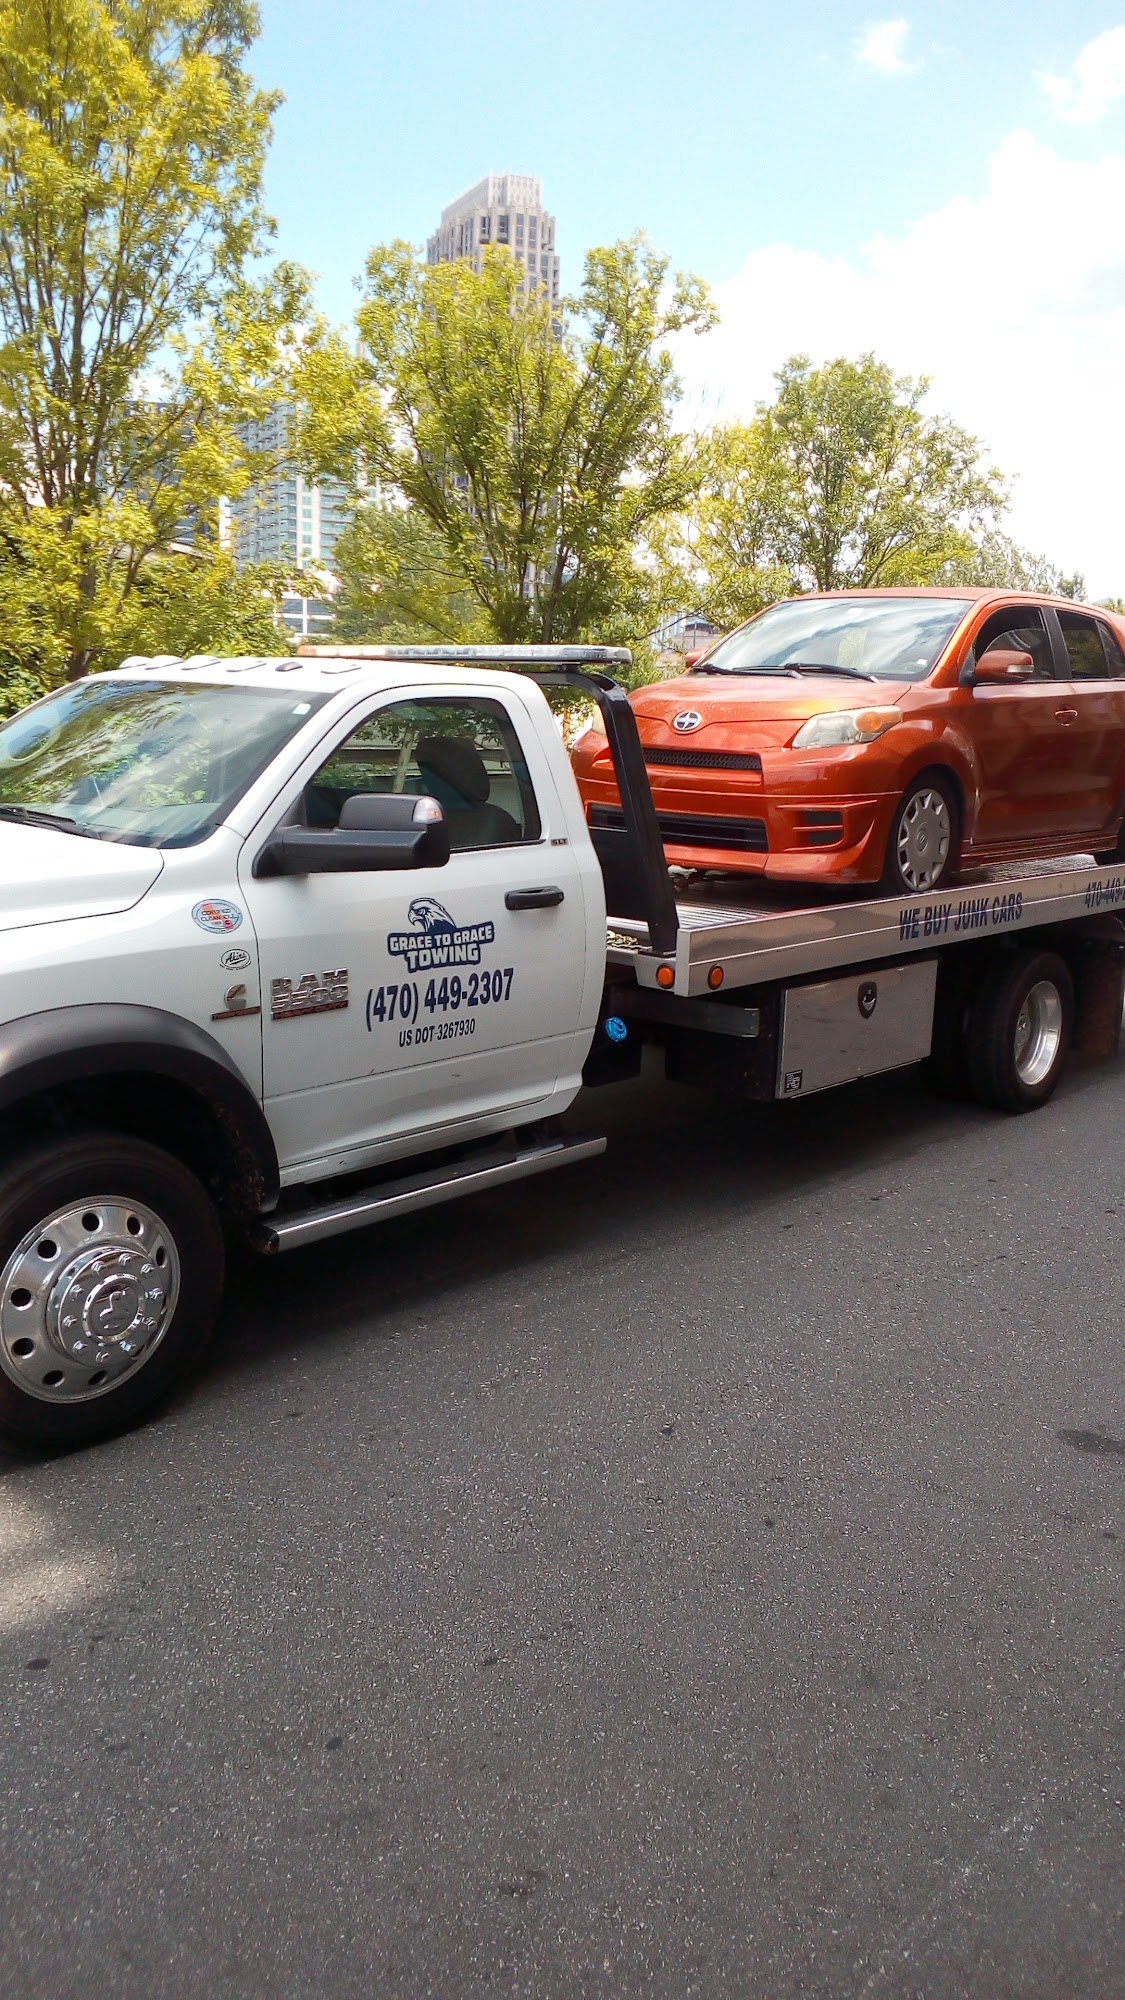 Grace to Grace towing-cash for used cars Atlanta-junk & wrecked car removal near me